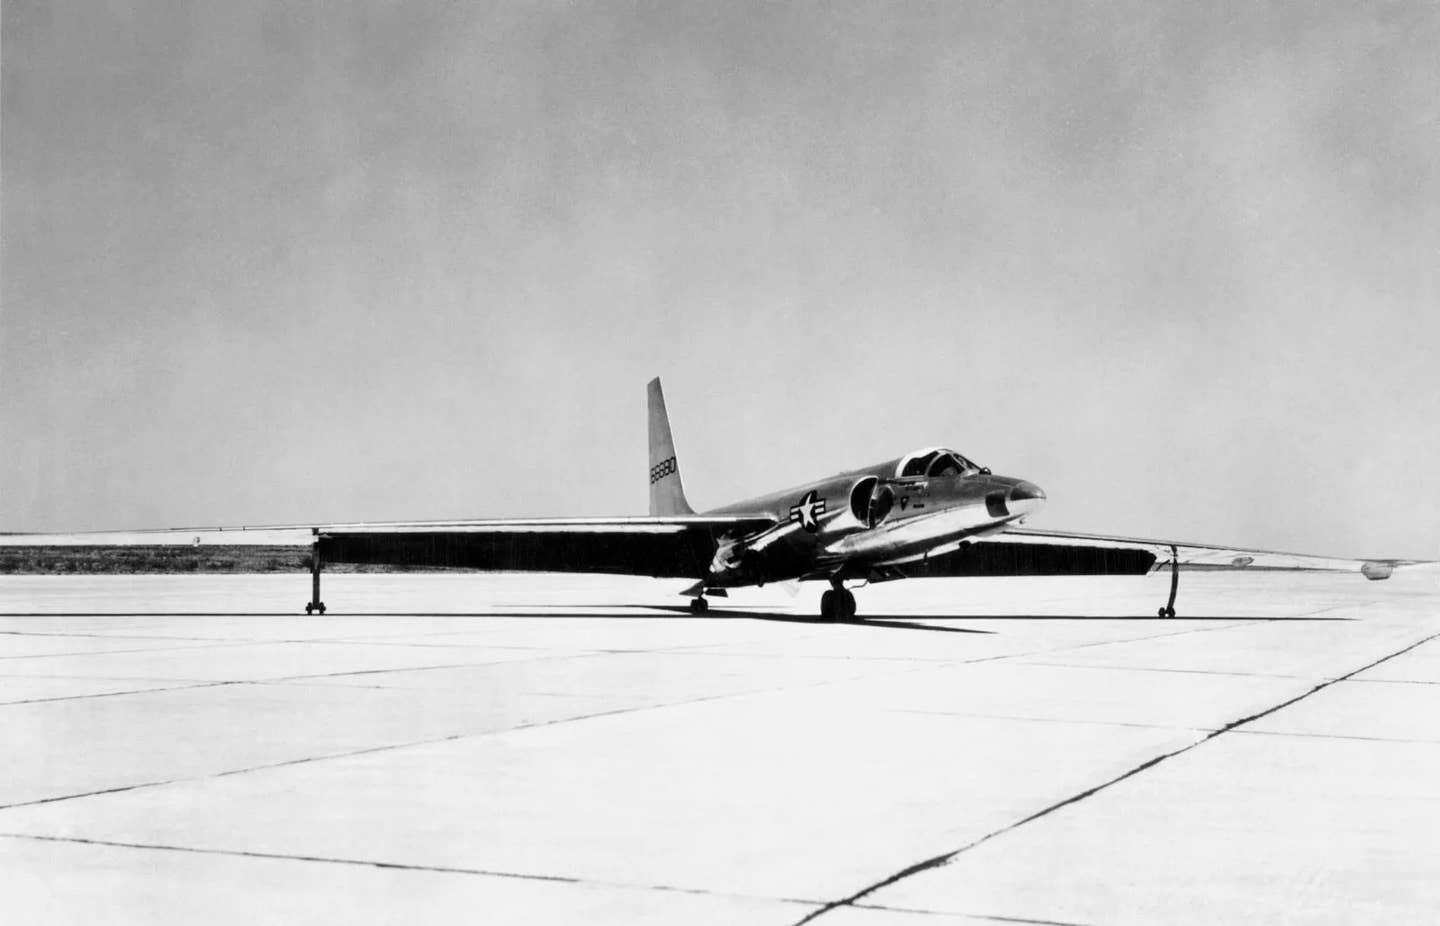 Many UFO sighting during the height of the Cold War were caused by high flying secretive aircraft like the U-2 and A-12, and the CIA understood the opportunity presented in making it stay this way. (USAF)